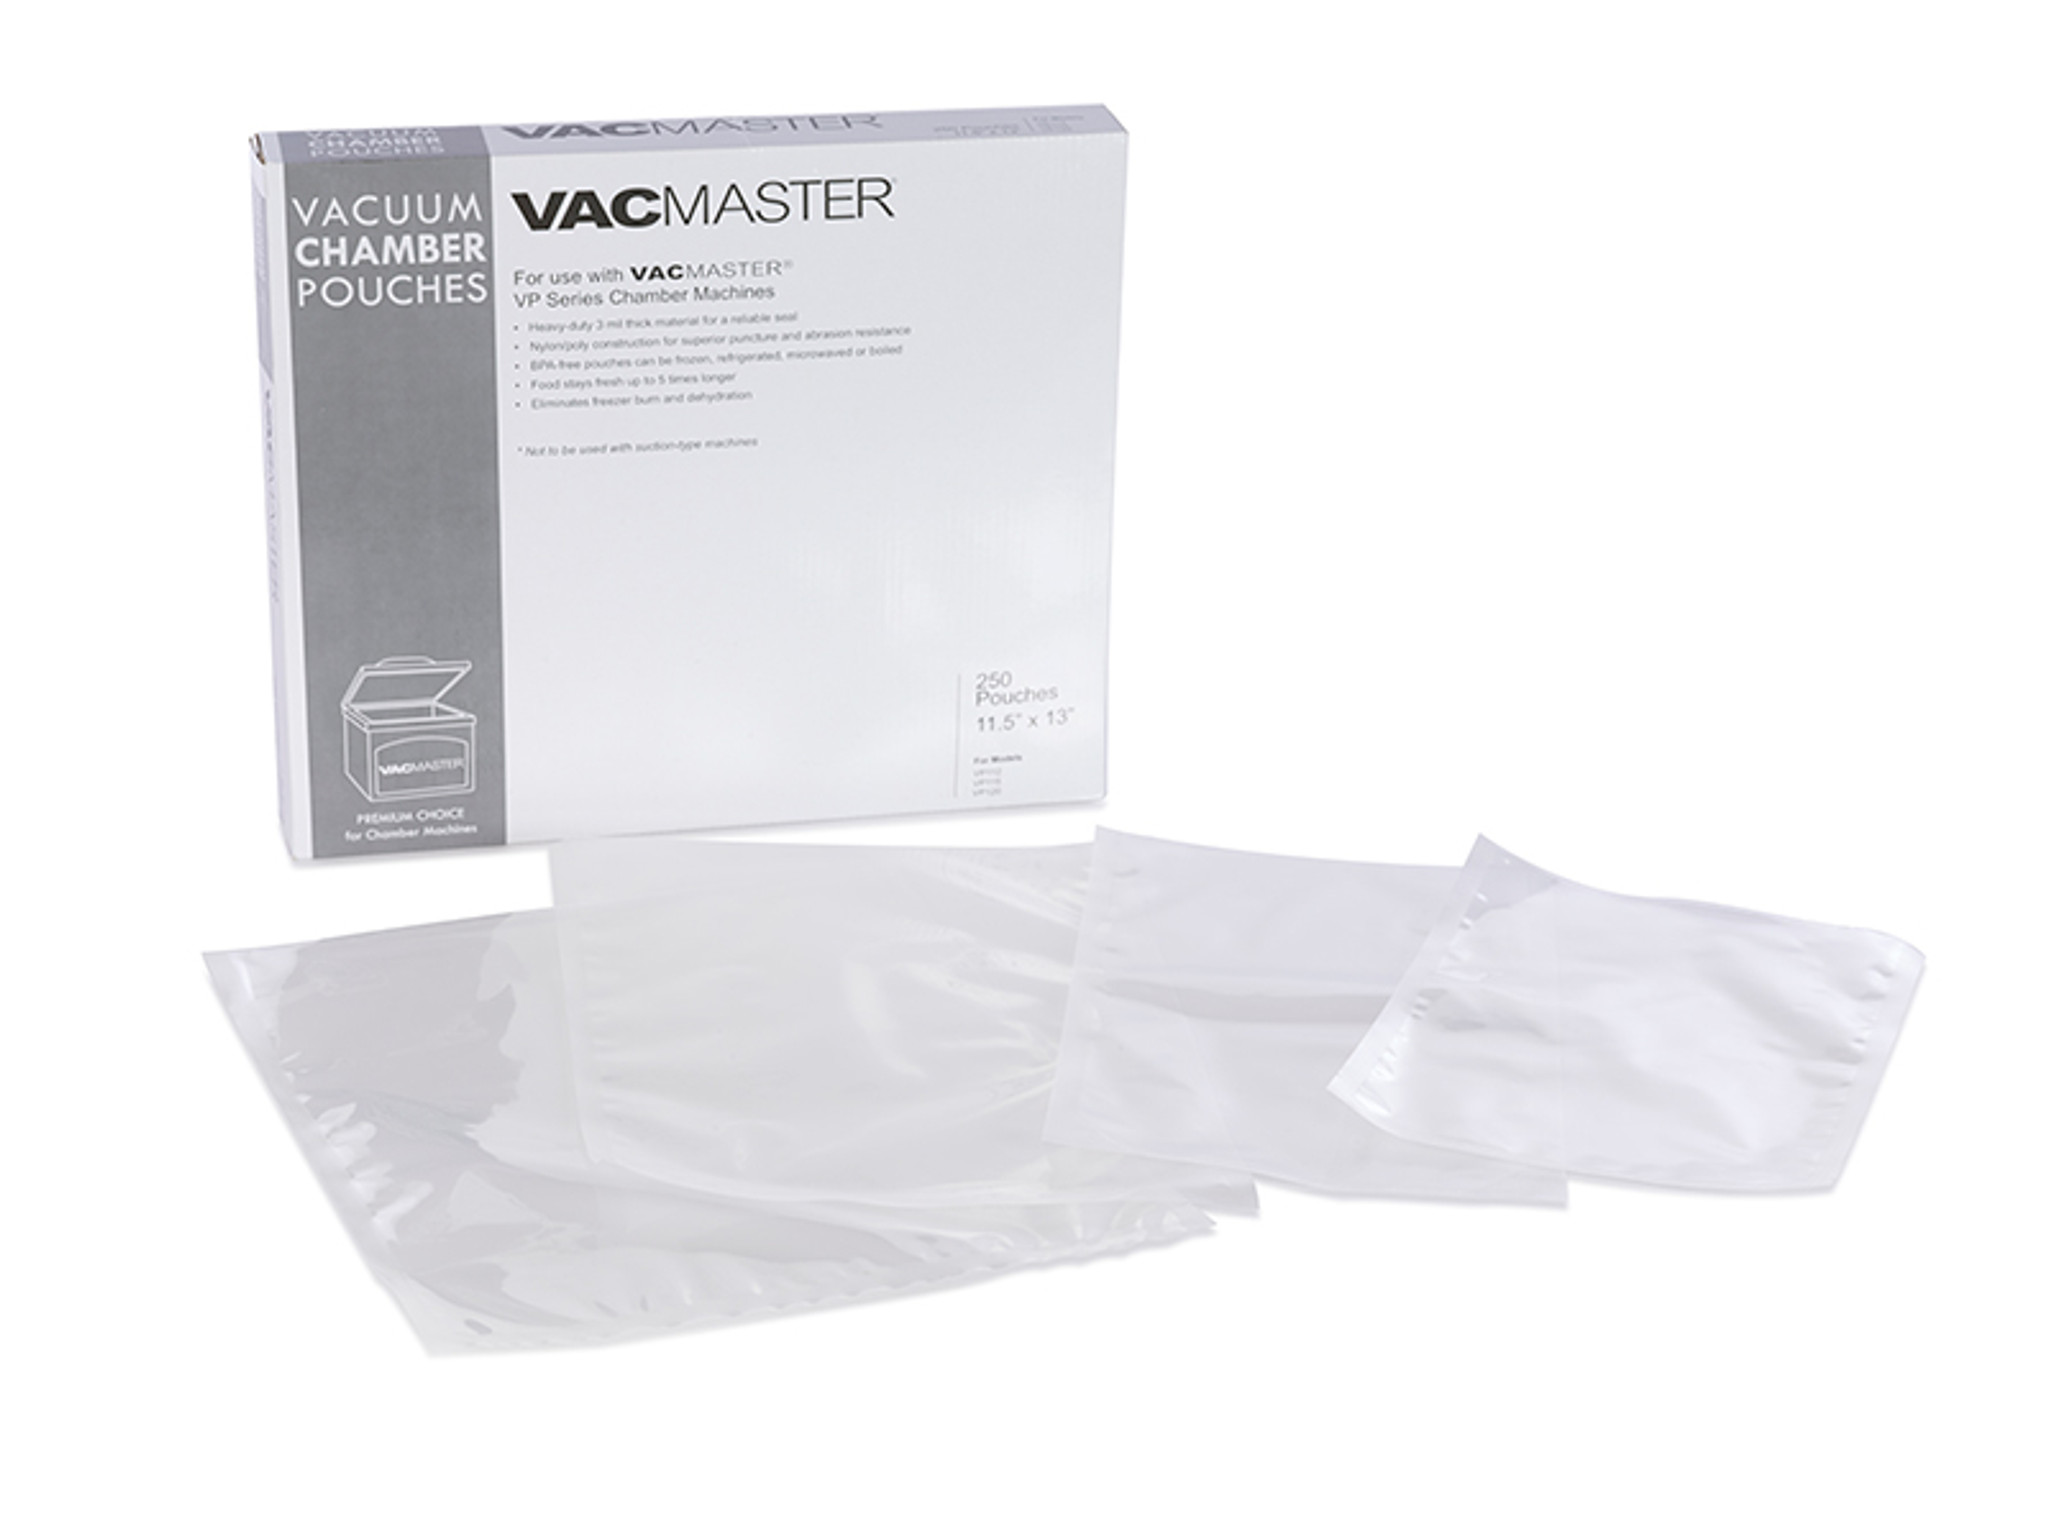 VacPak-It 186CVB4810 8 x 10 Chamber Vacuum Packaging Pouches / Bags 4 Mil  - 1000/Case